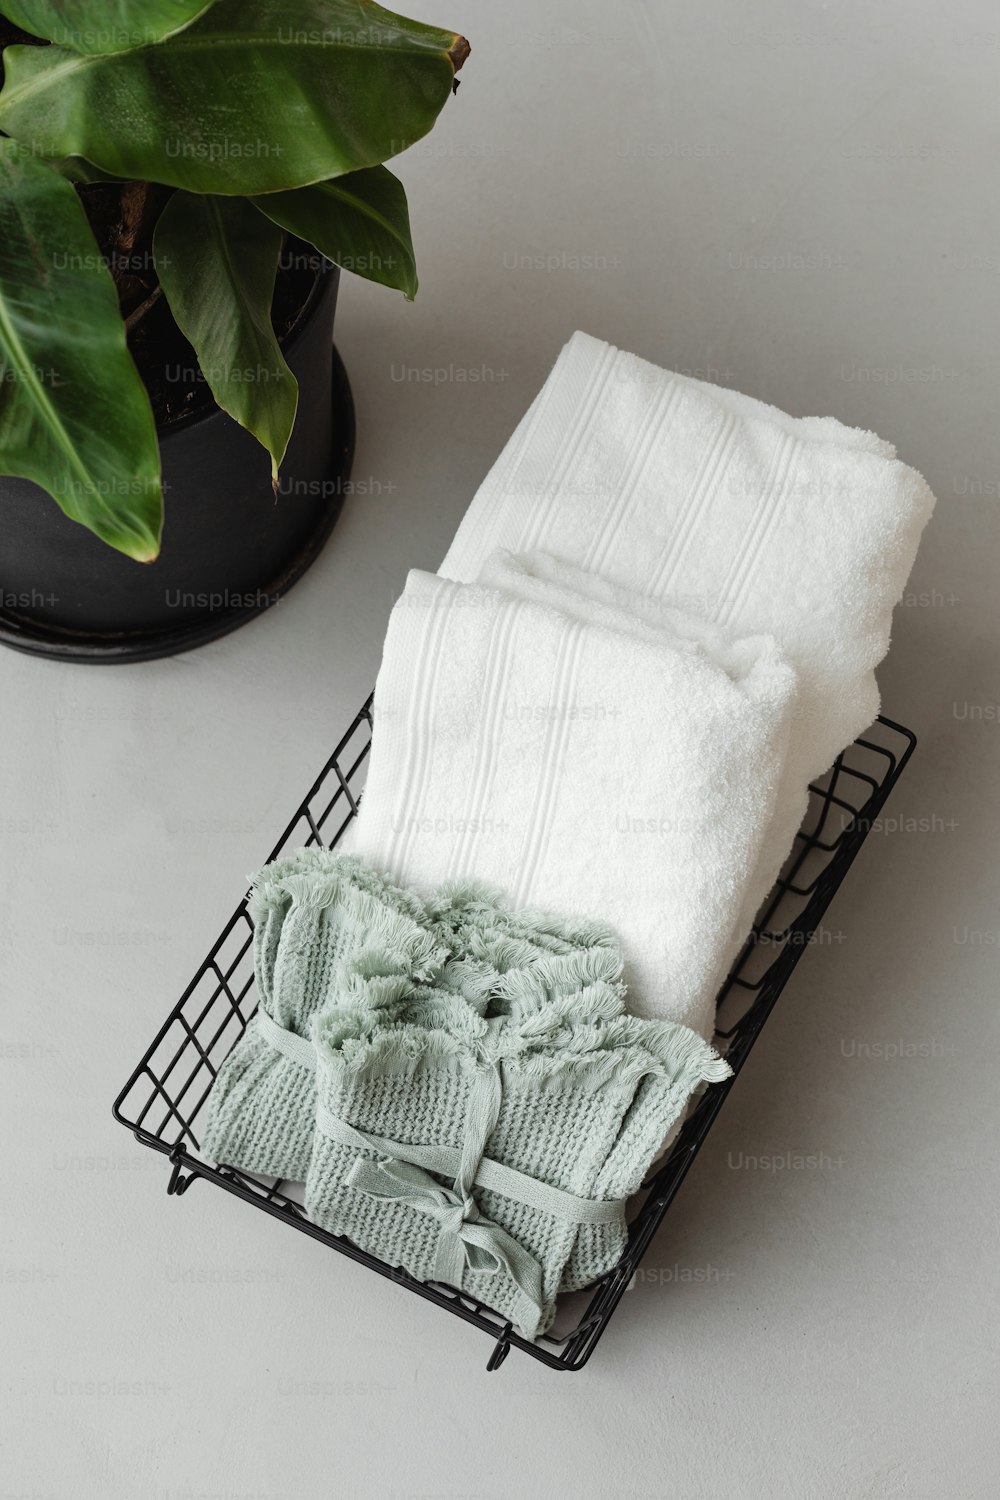 a basket of folded towels next to a potted plant